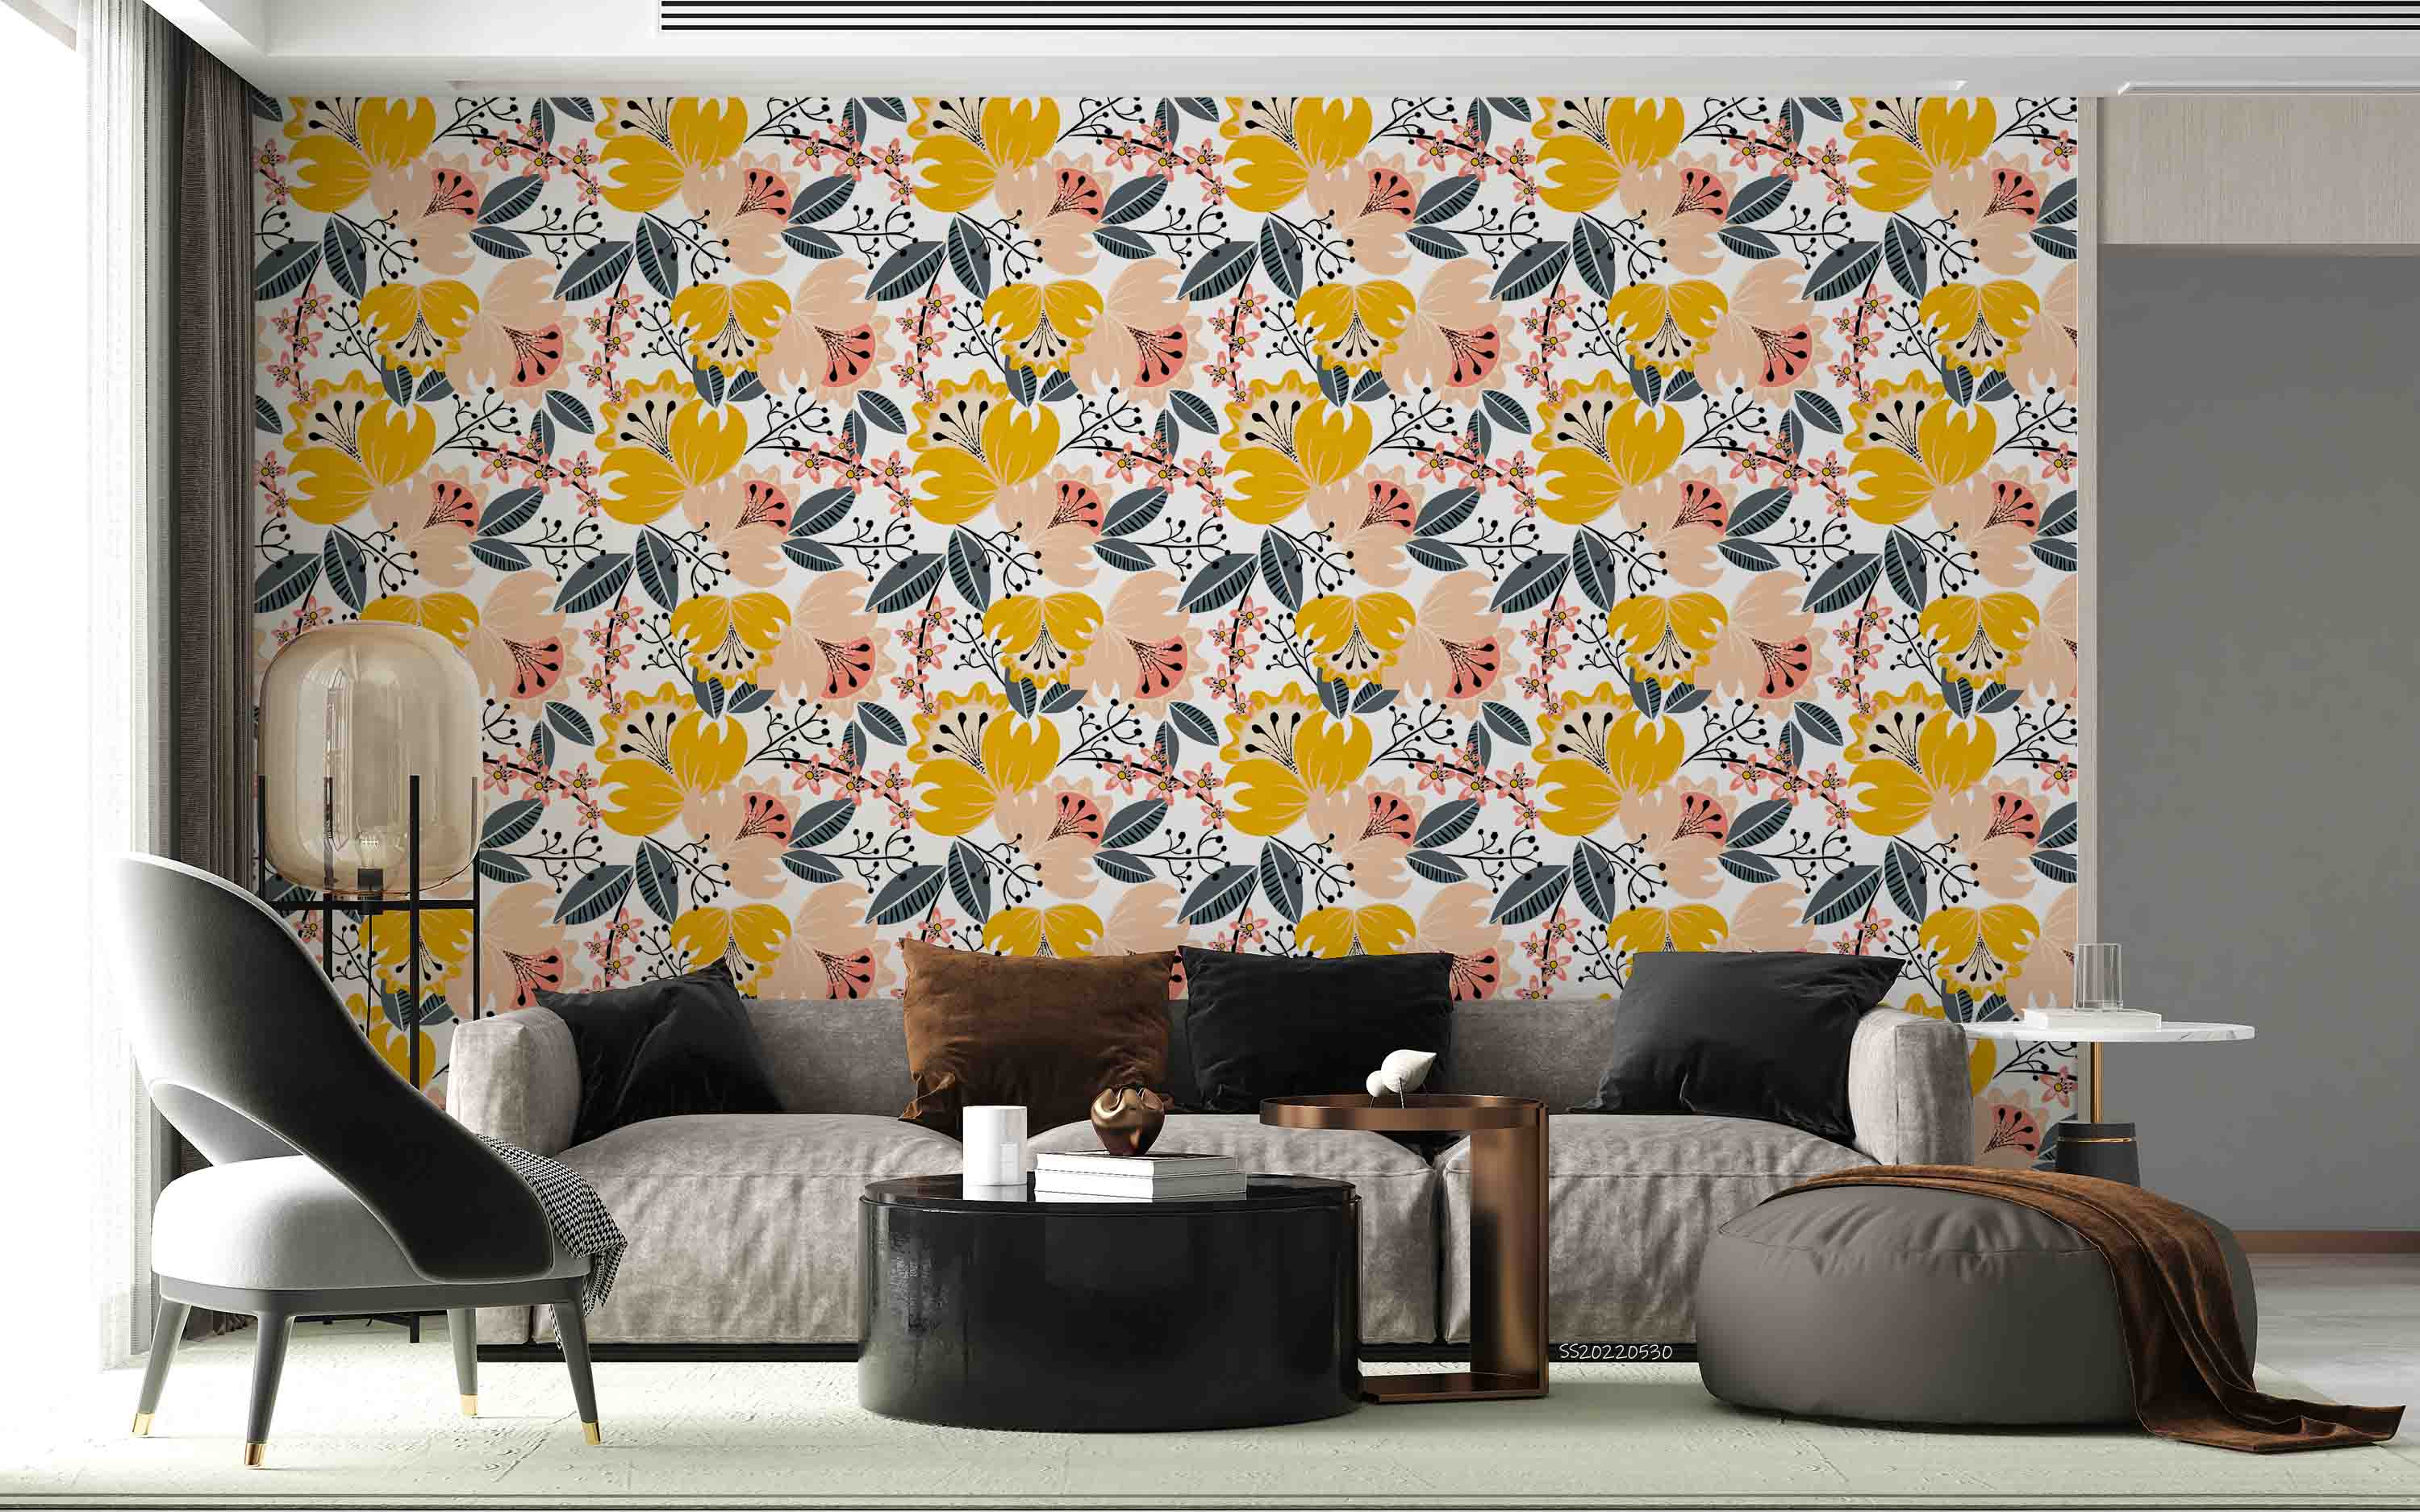 3D Vintage Yellow Floral Leaf White Wall Mural Wallpaper GD 5- Jess Art Decoration